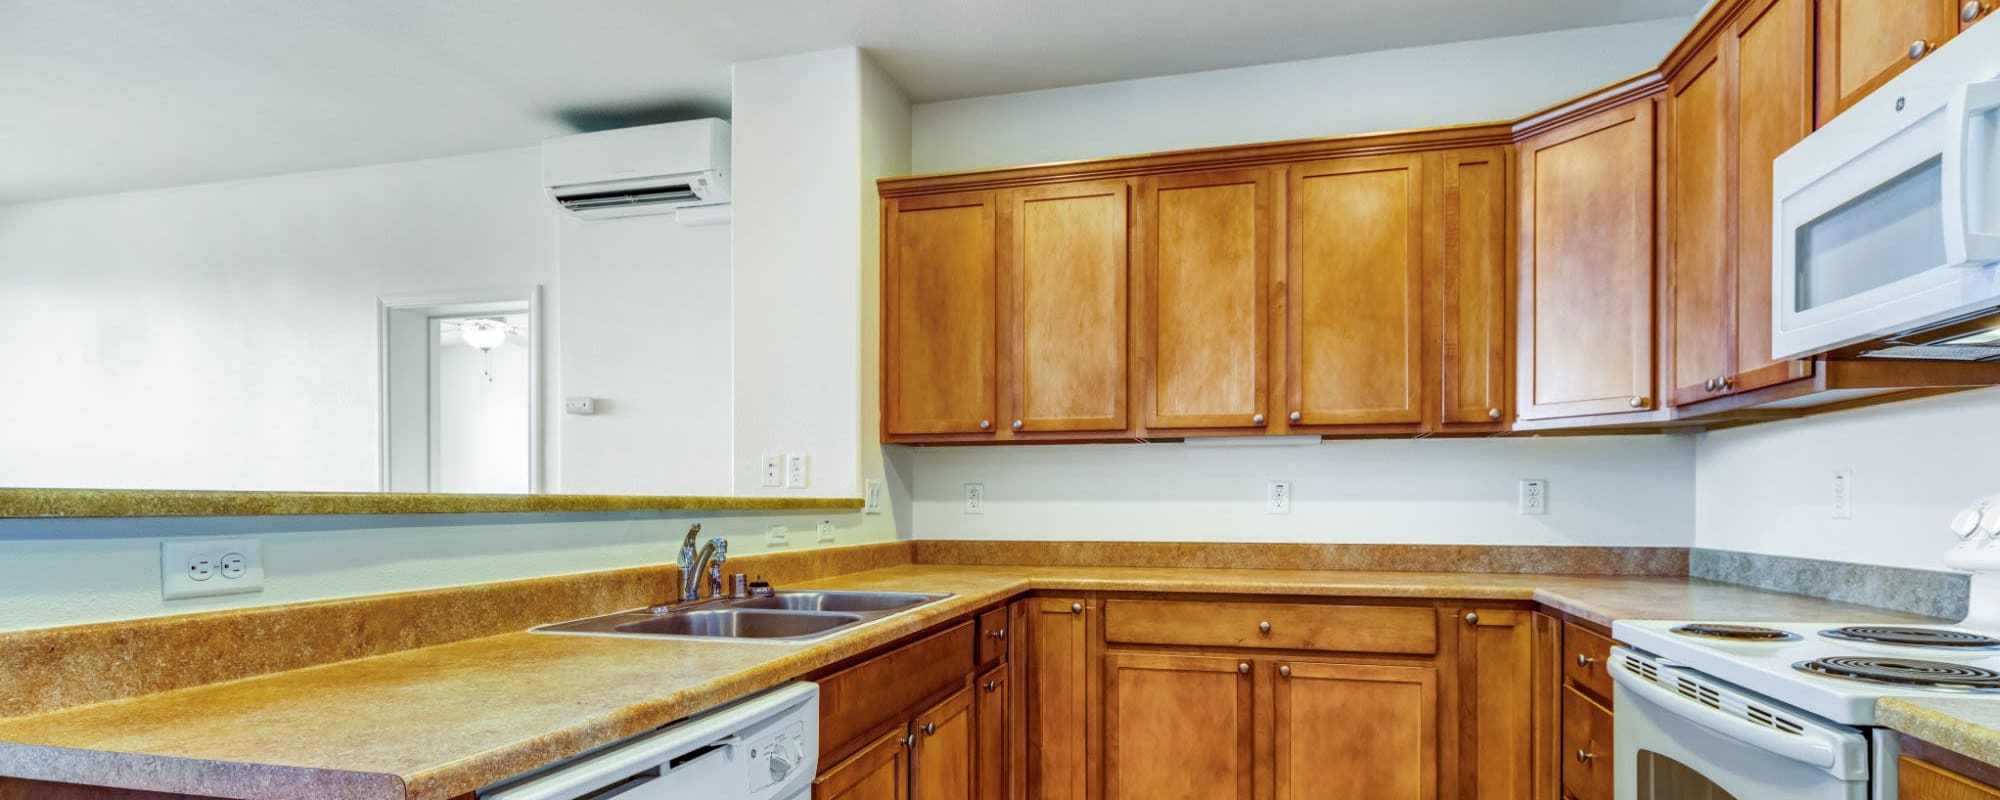 Kitchen of one of our apartment style homes at Town Center in Joint Base Lewis McChord, Washington